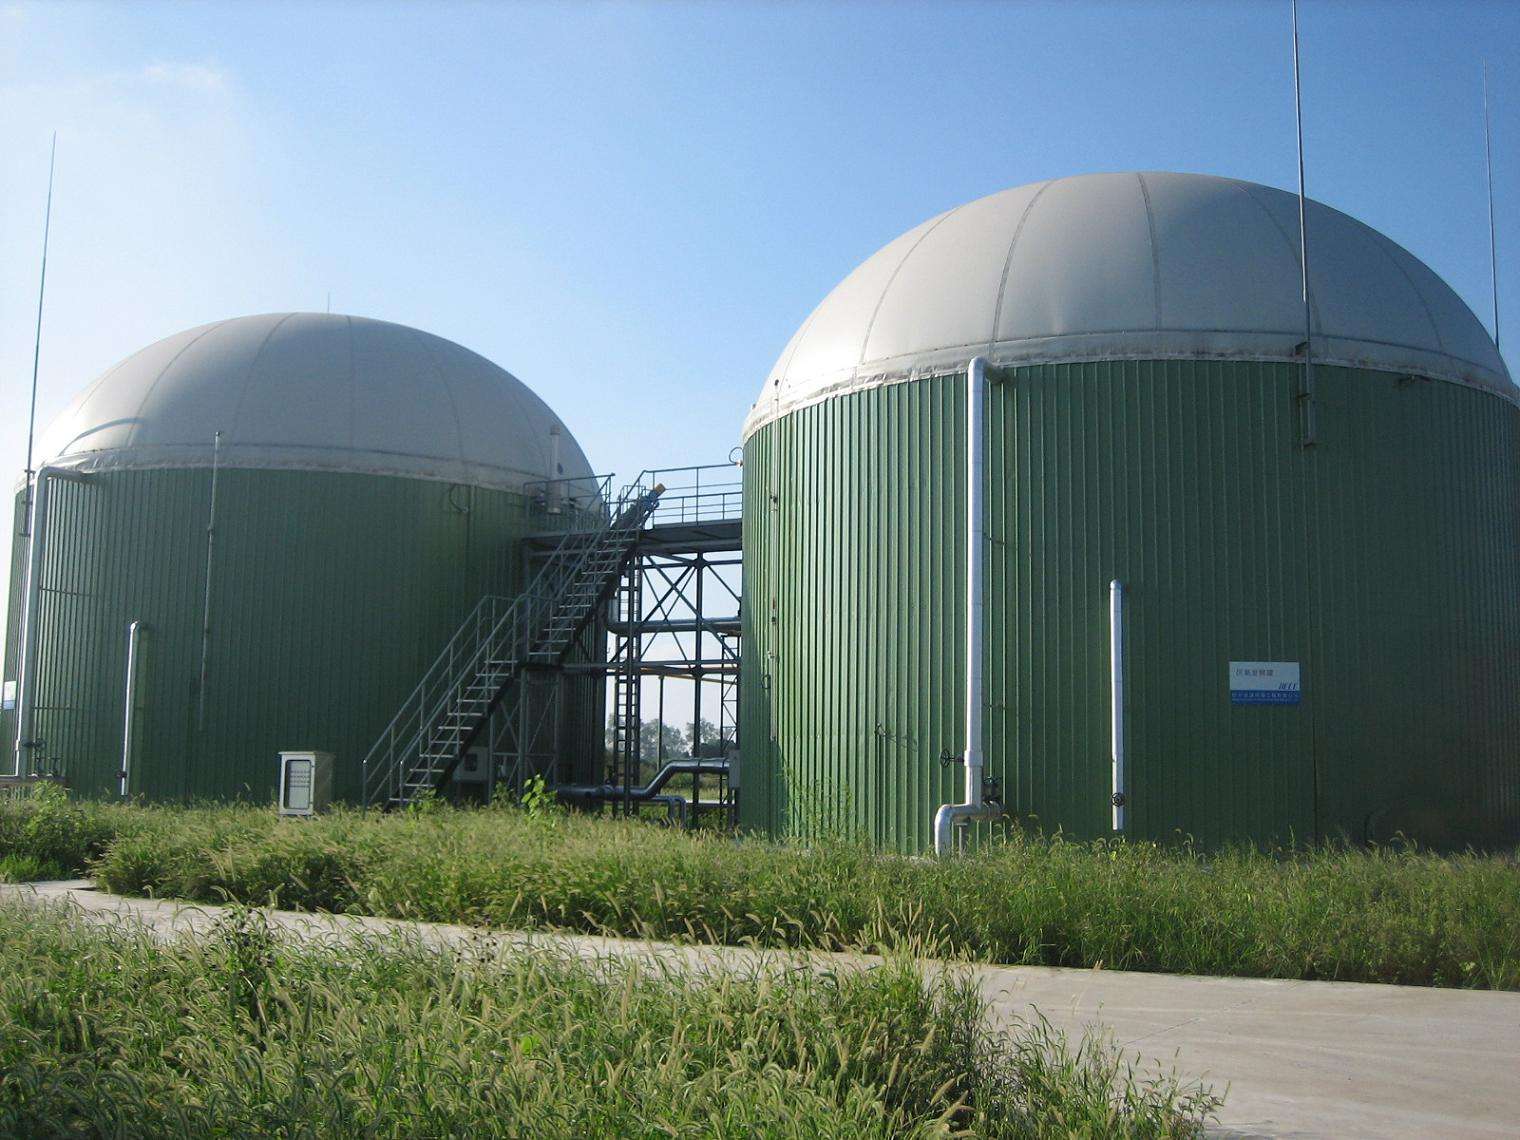 What design parameters are required for biogas projects?